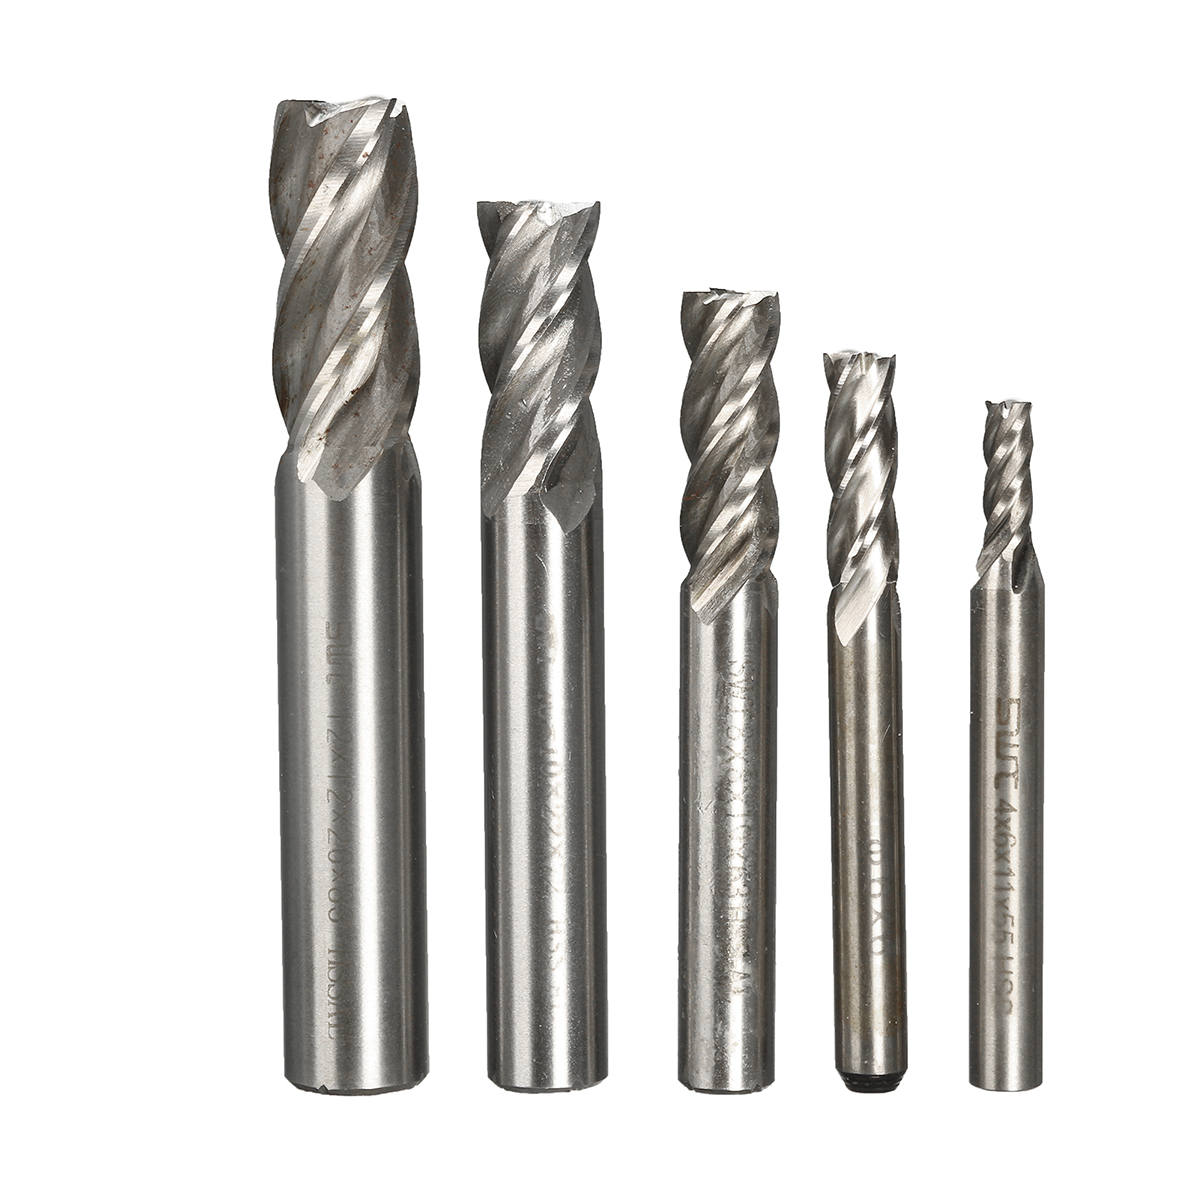 Straight Shank 4 Flutes End Mill Cutter Set for CNC Milling Machine Tool Bit